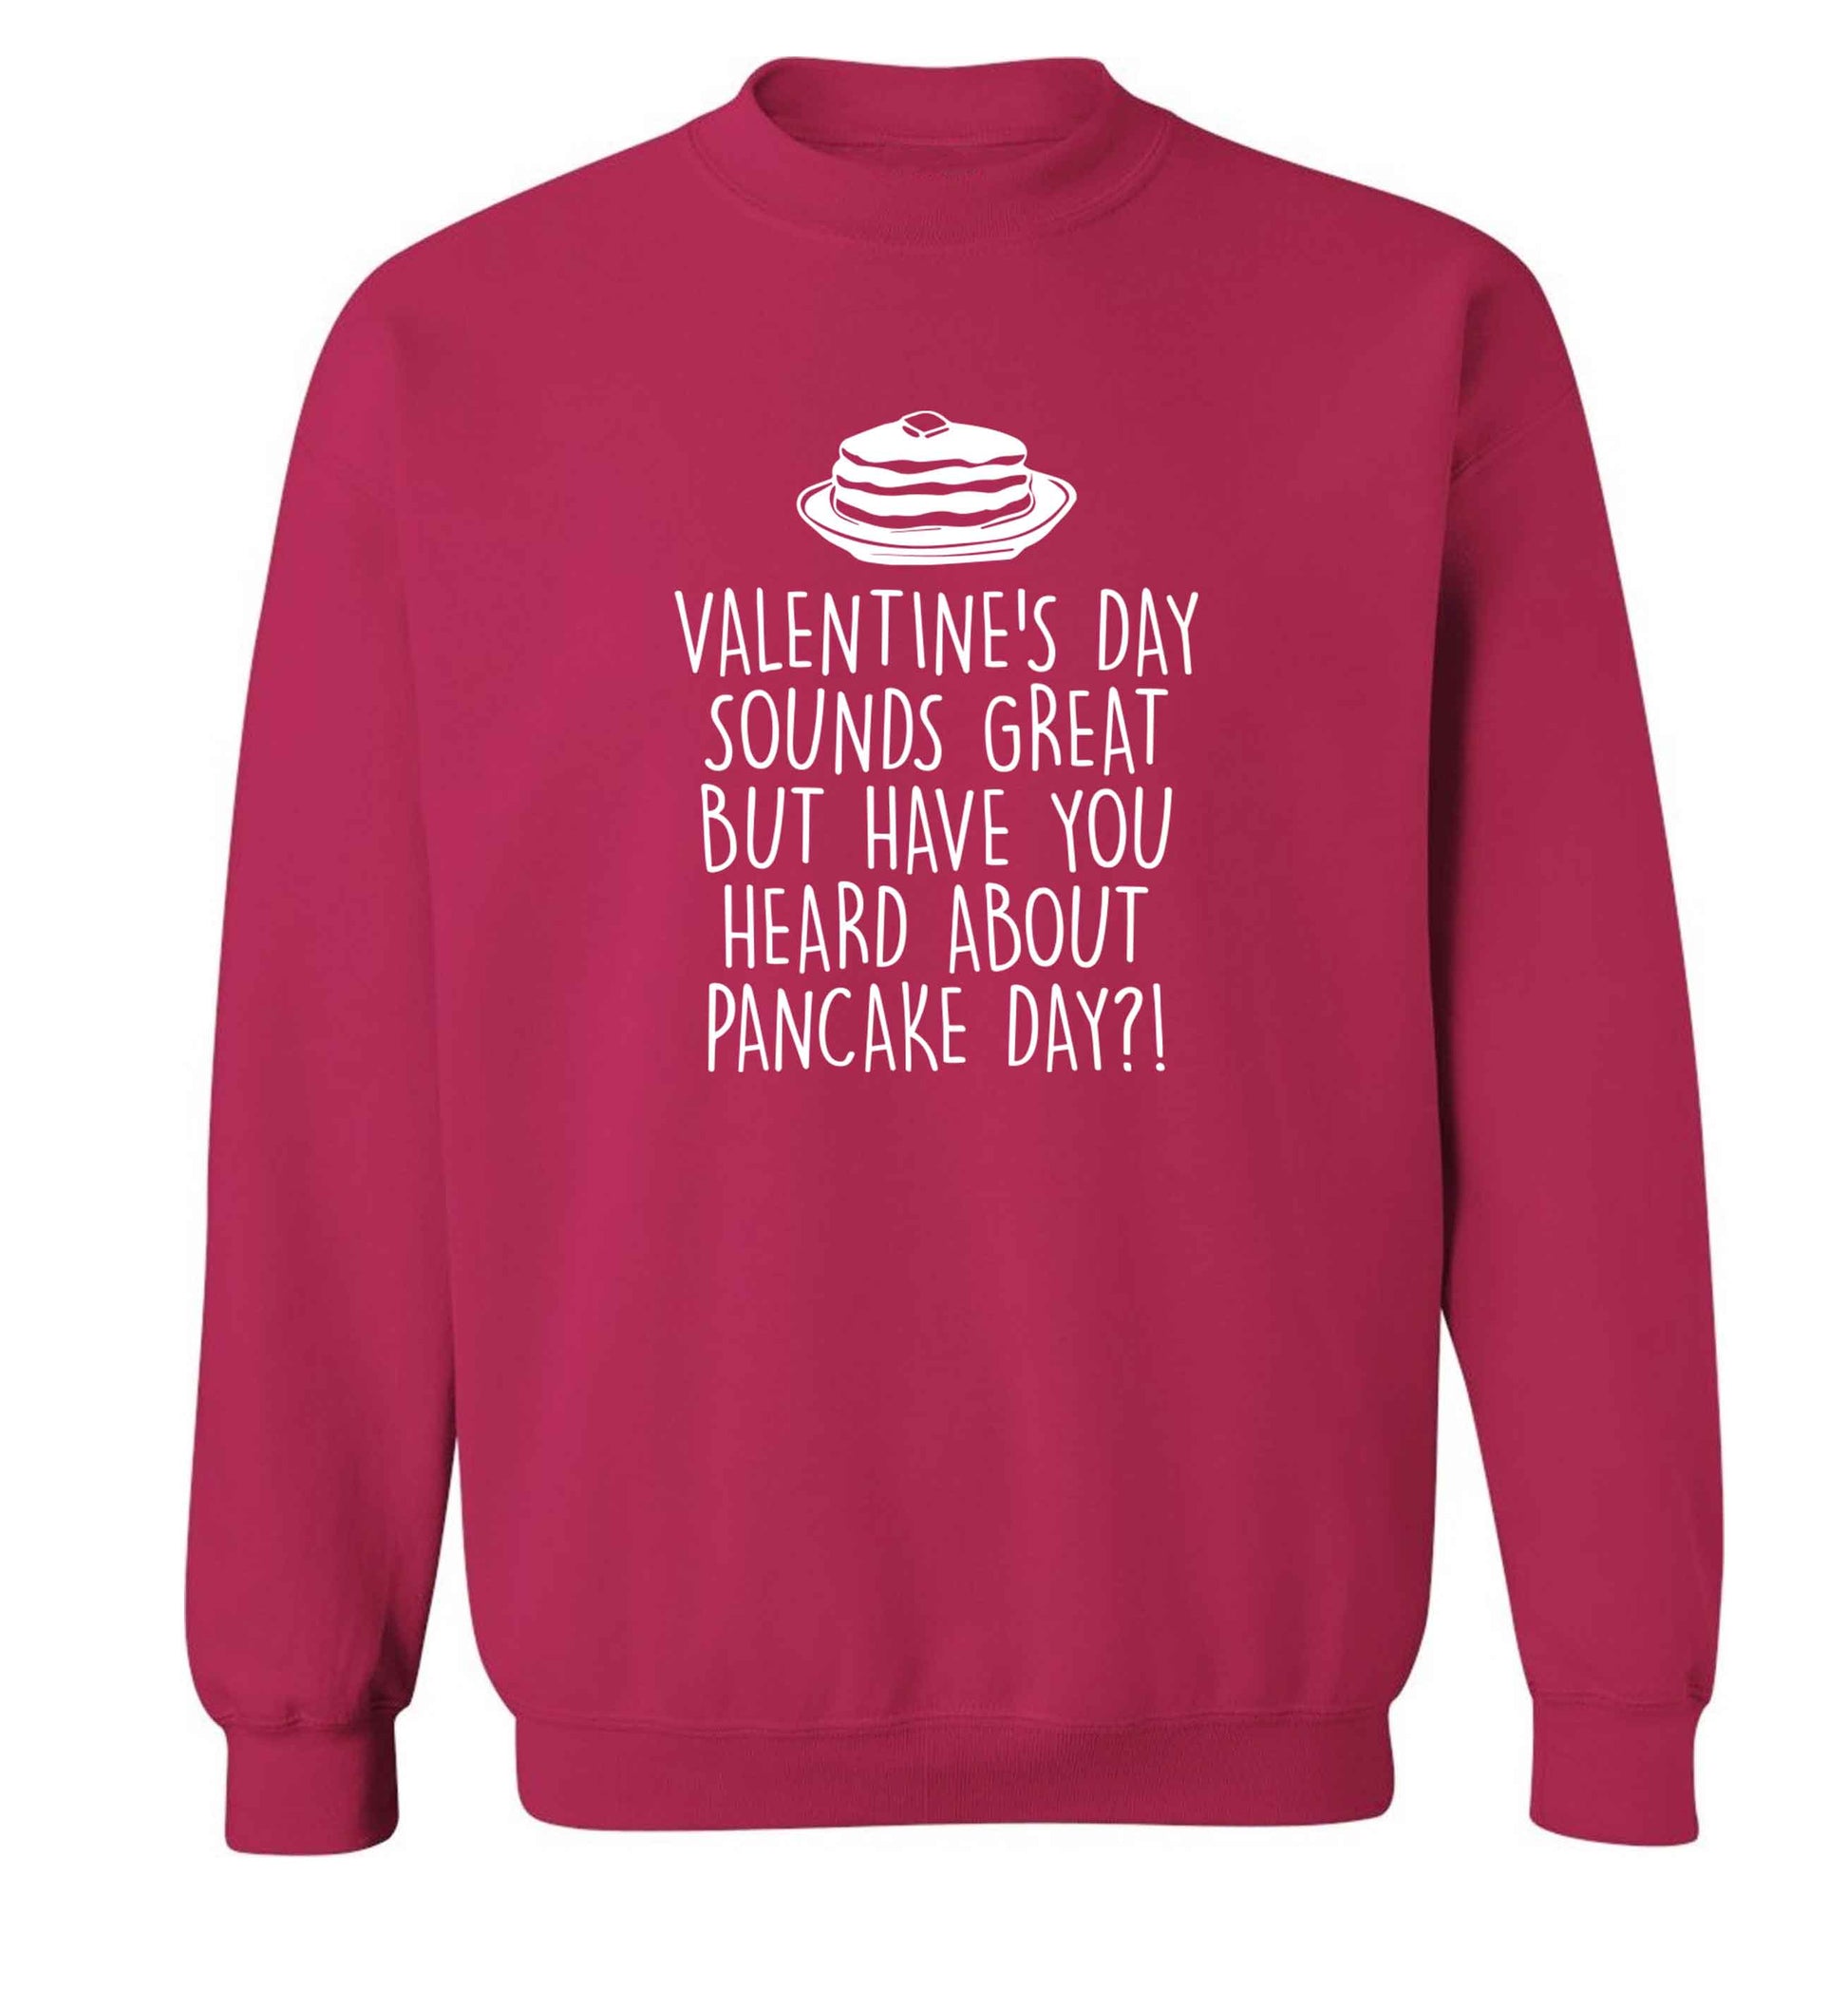 Valentine's day sounds great but have you heard about pancake day?! adult's unisex pink sweater 2XL